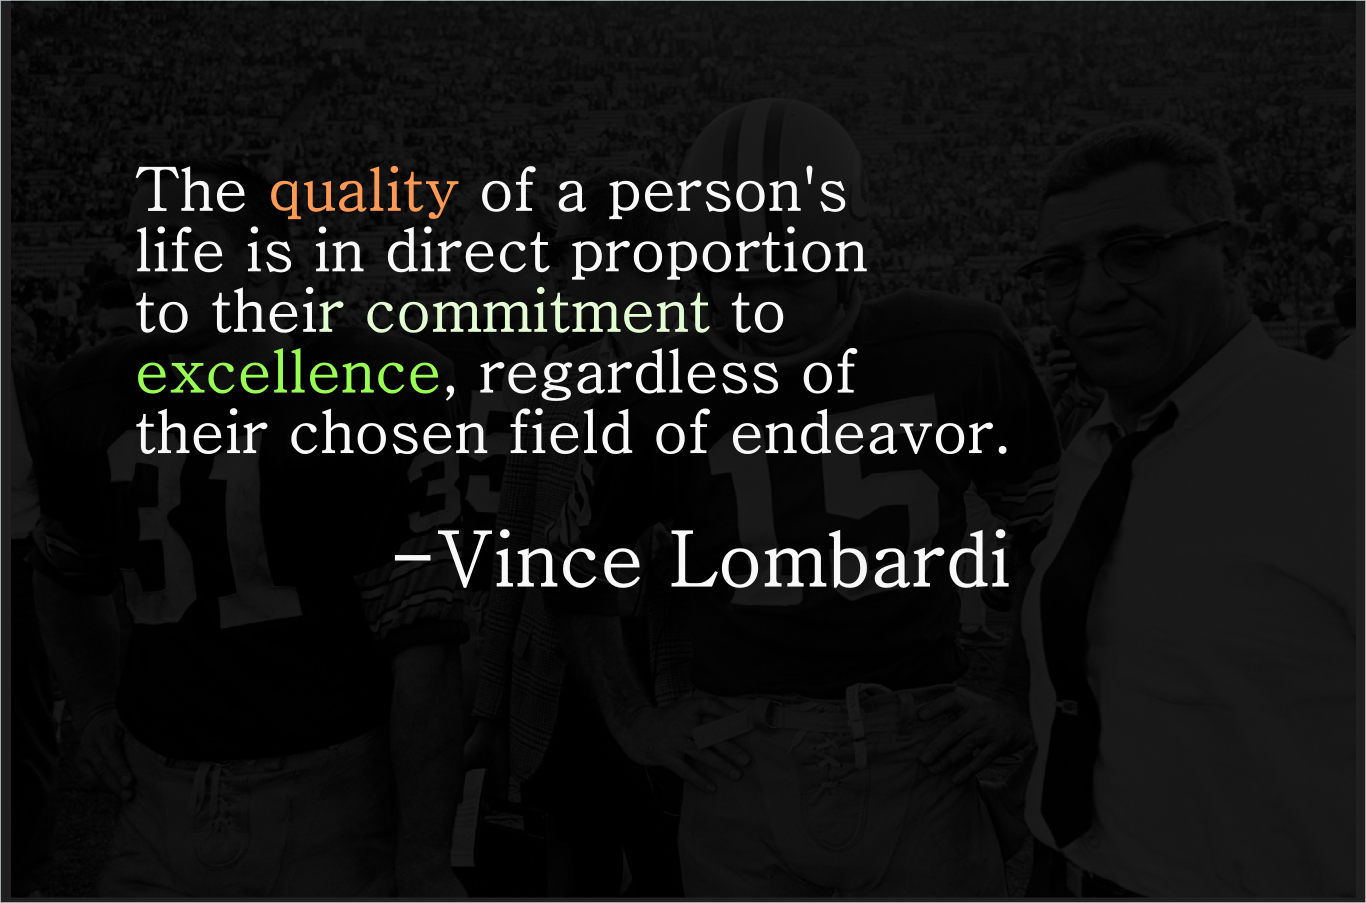 Vince Lombardi's quote #1